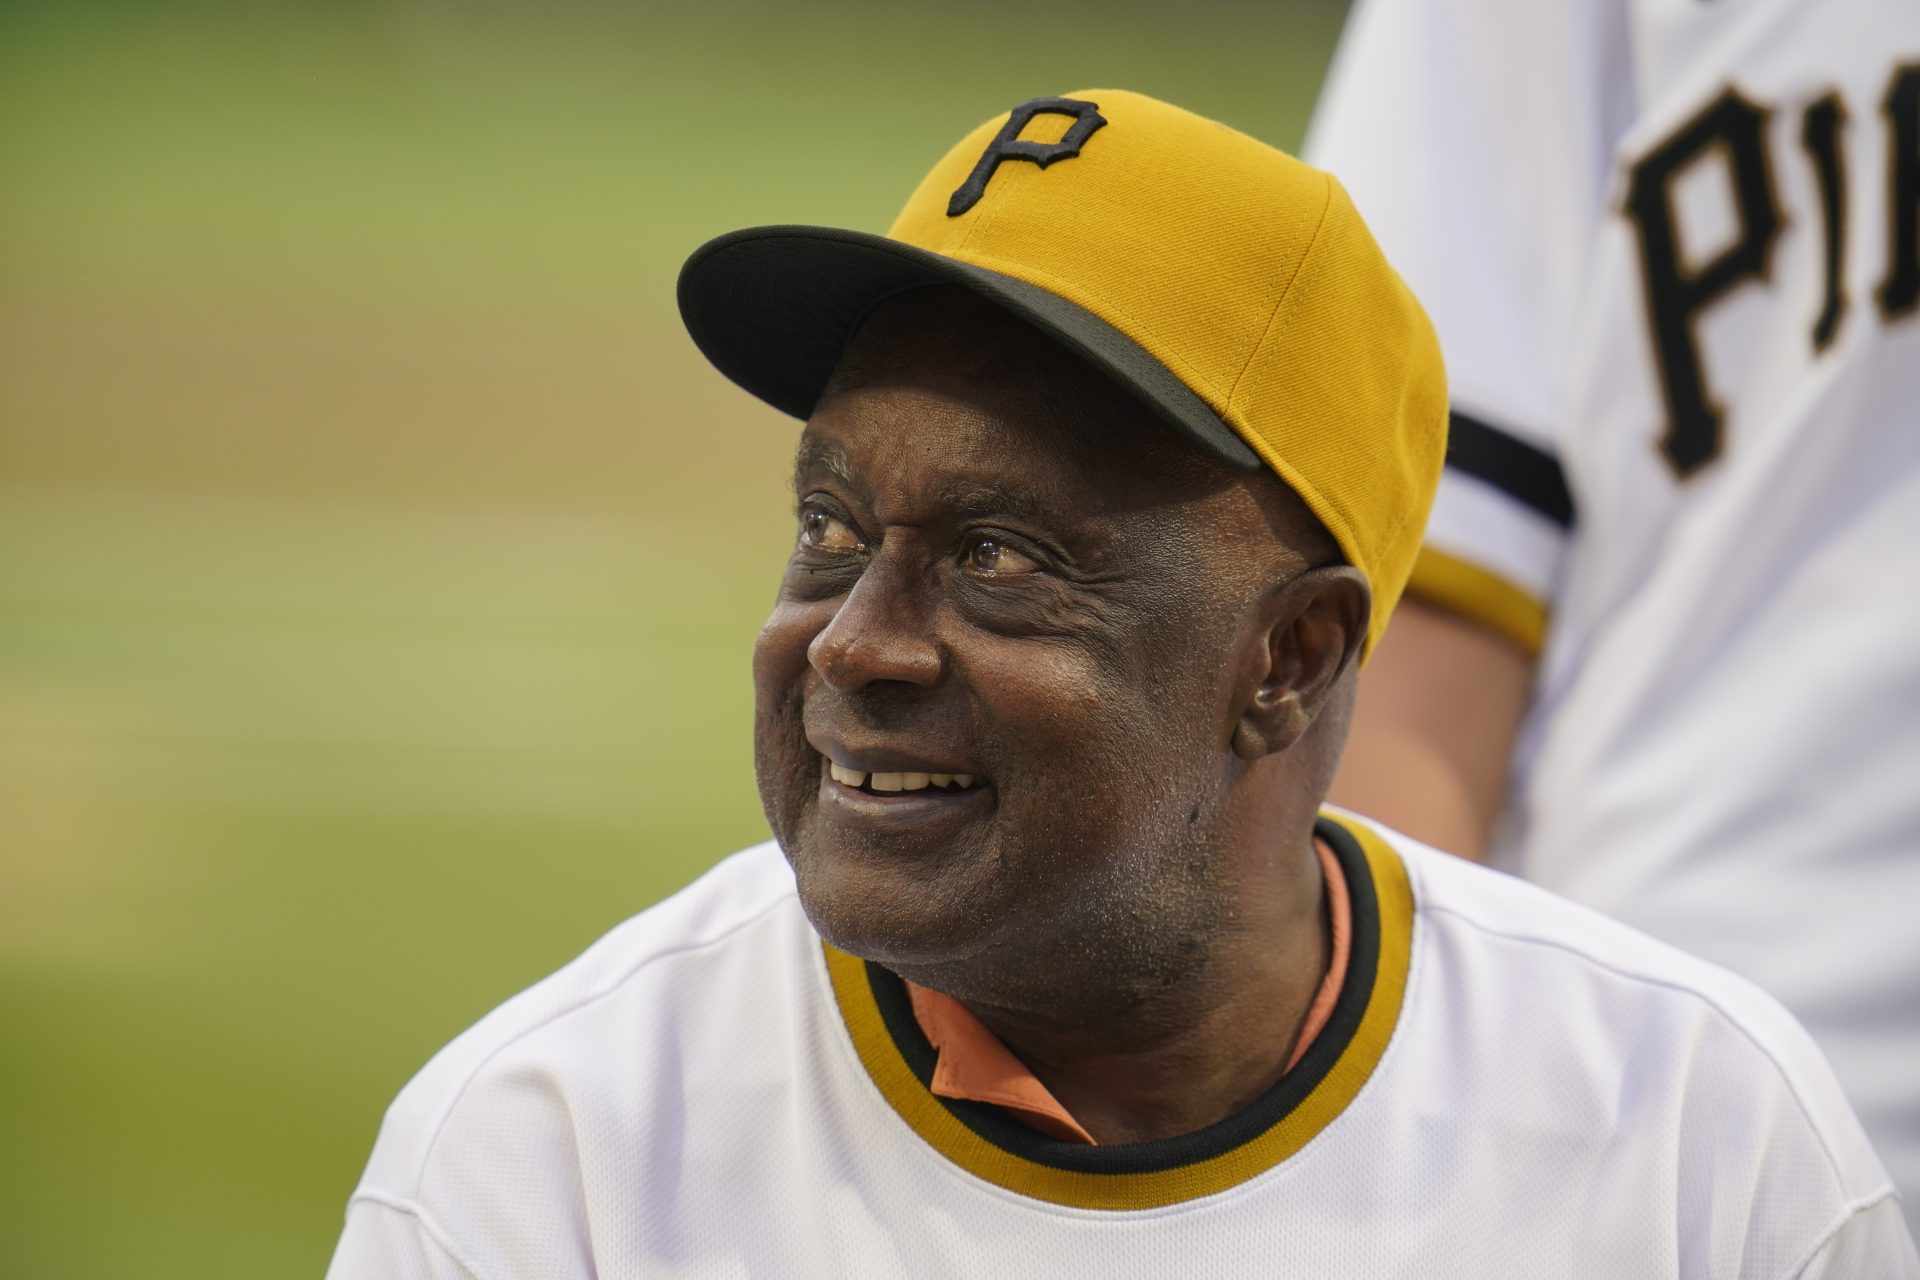 Gene Clines, a member of the 1971 World Champion Pittsburgh Pirates, takes part in a celebration of the 50th anniversary of the championship season before of a baseball game between the Pirates and the New York Mets in Pittsburgh, Saturday, July 17, 2021.